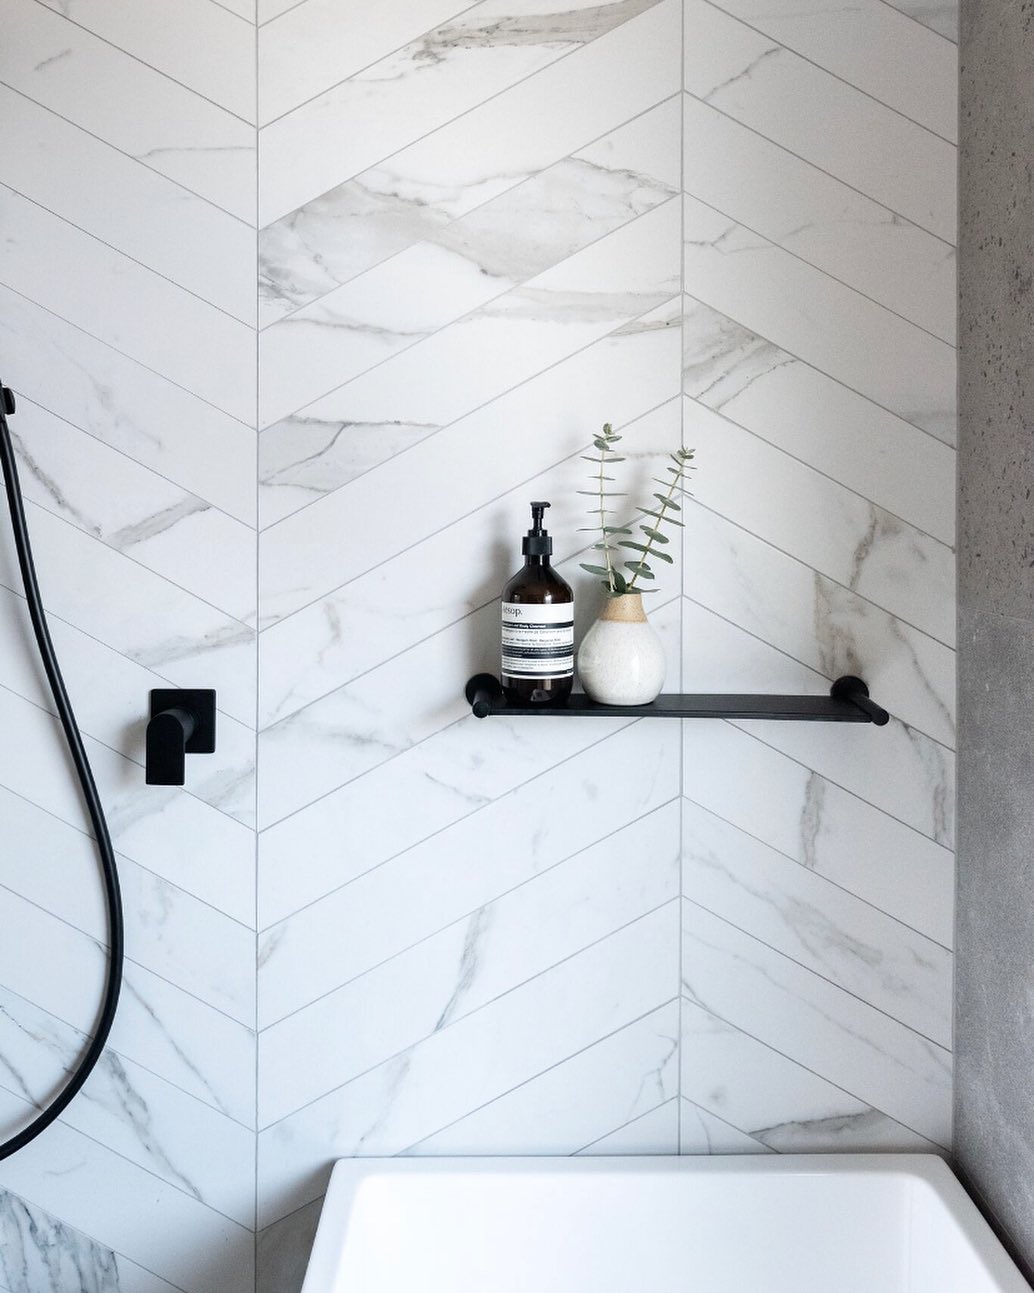 Marble tile bathroom with black floating shelf about tub. Photo by Instagram user @hatchrenovations